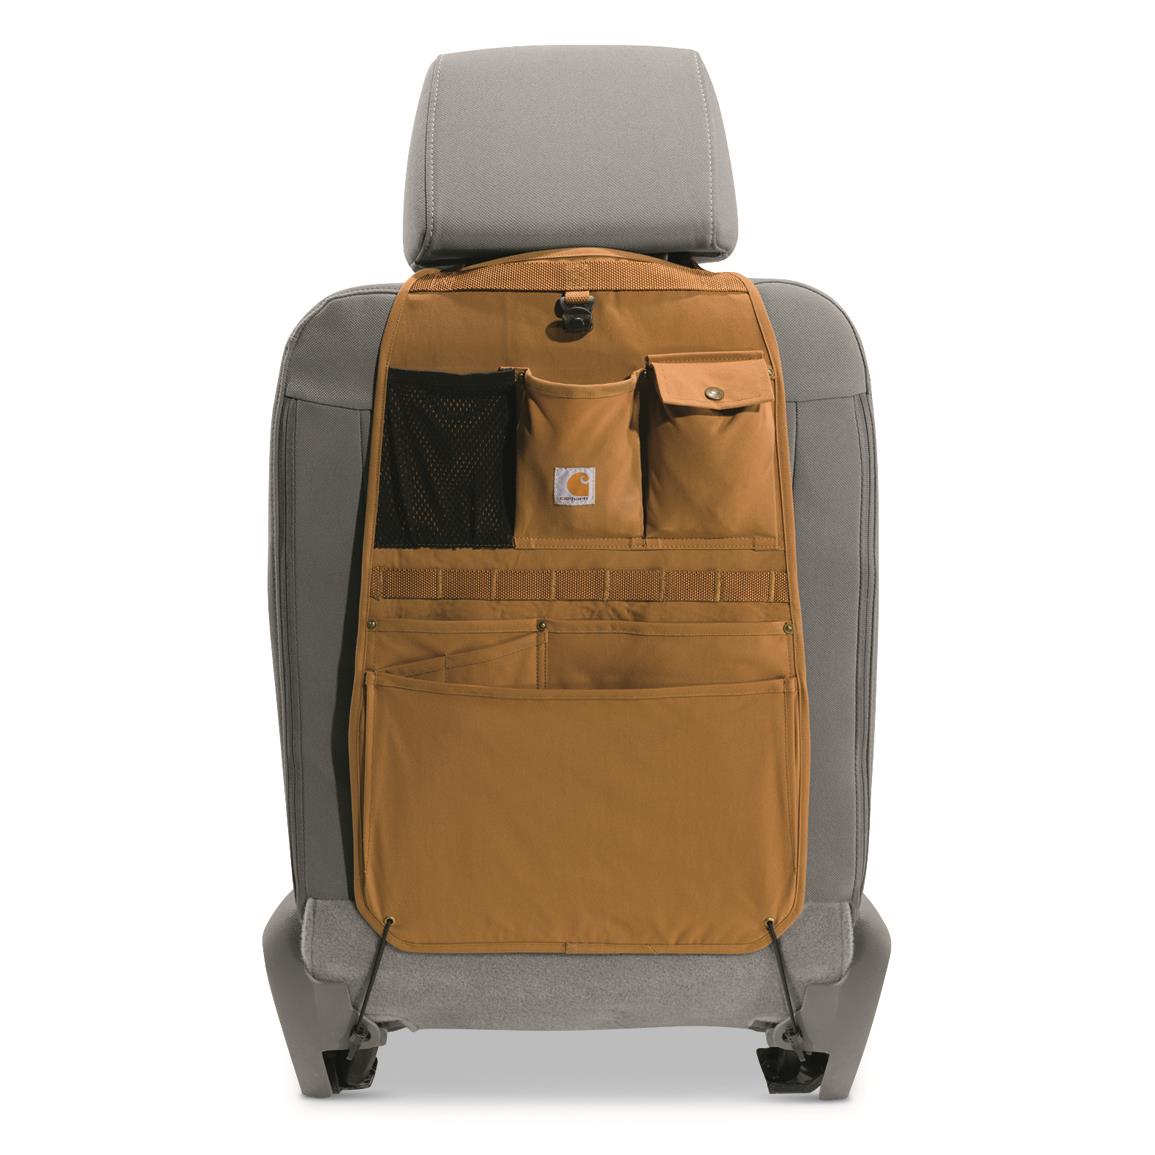 Attaches easily to almost any car or truck, Carhartt® Brown